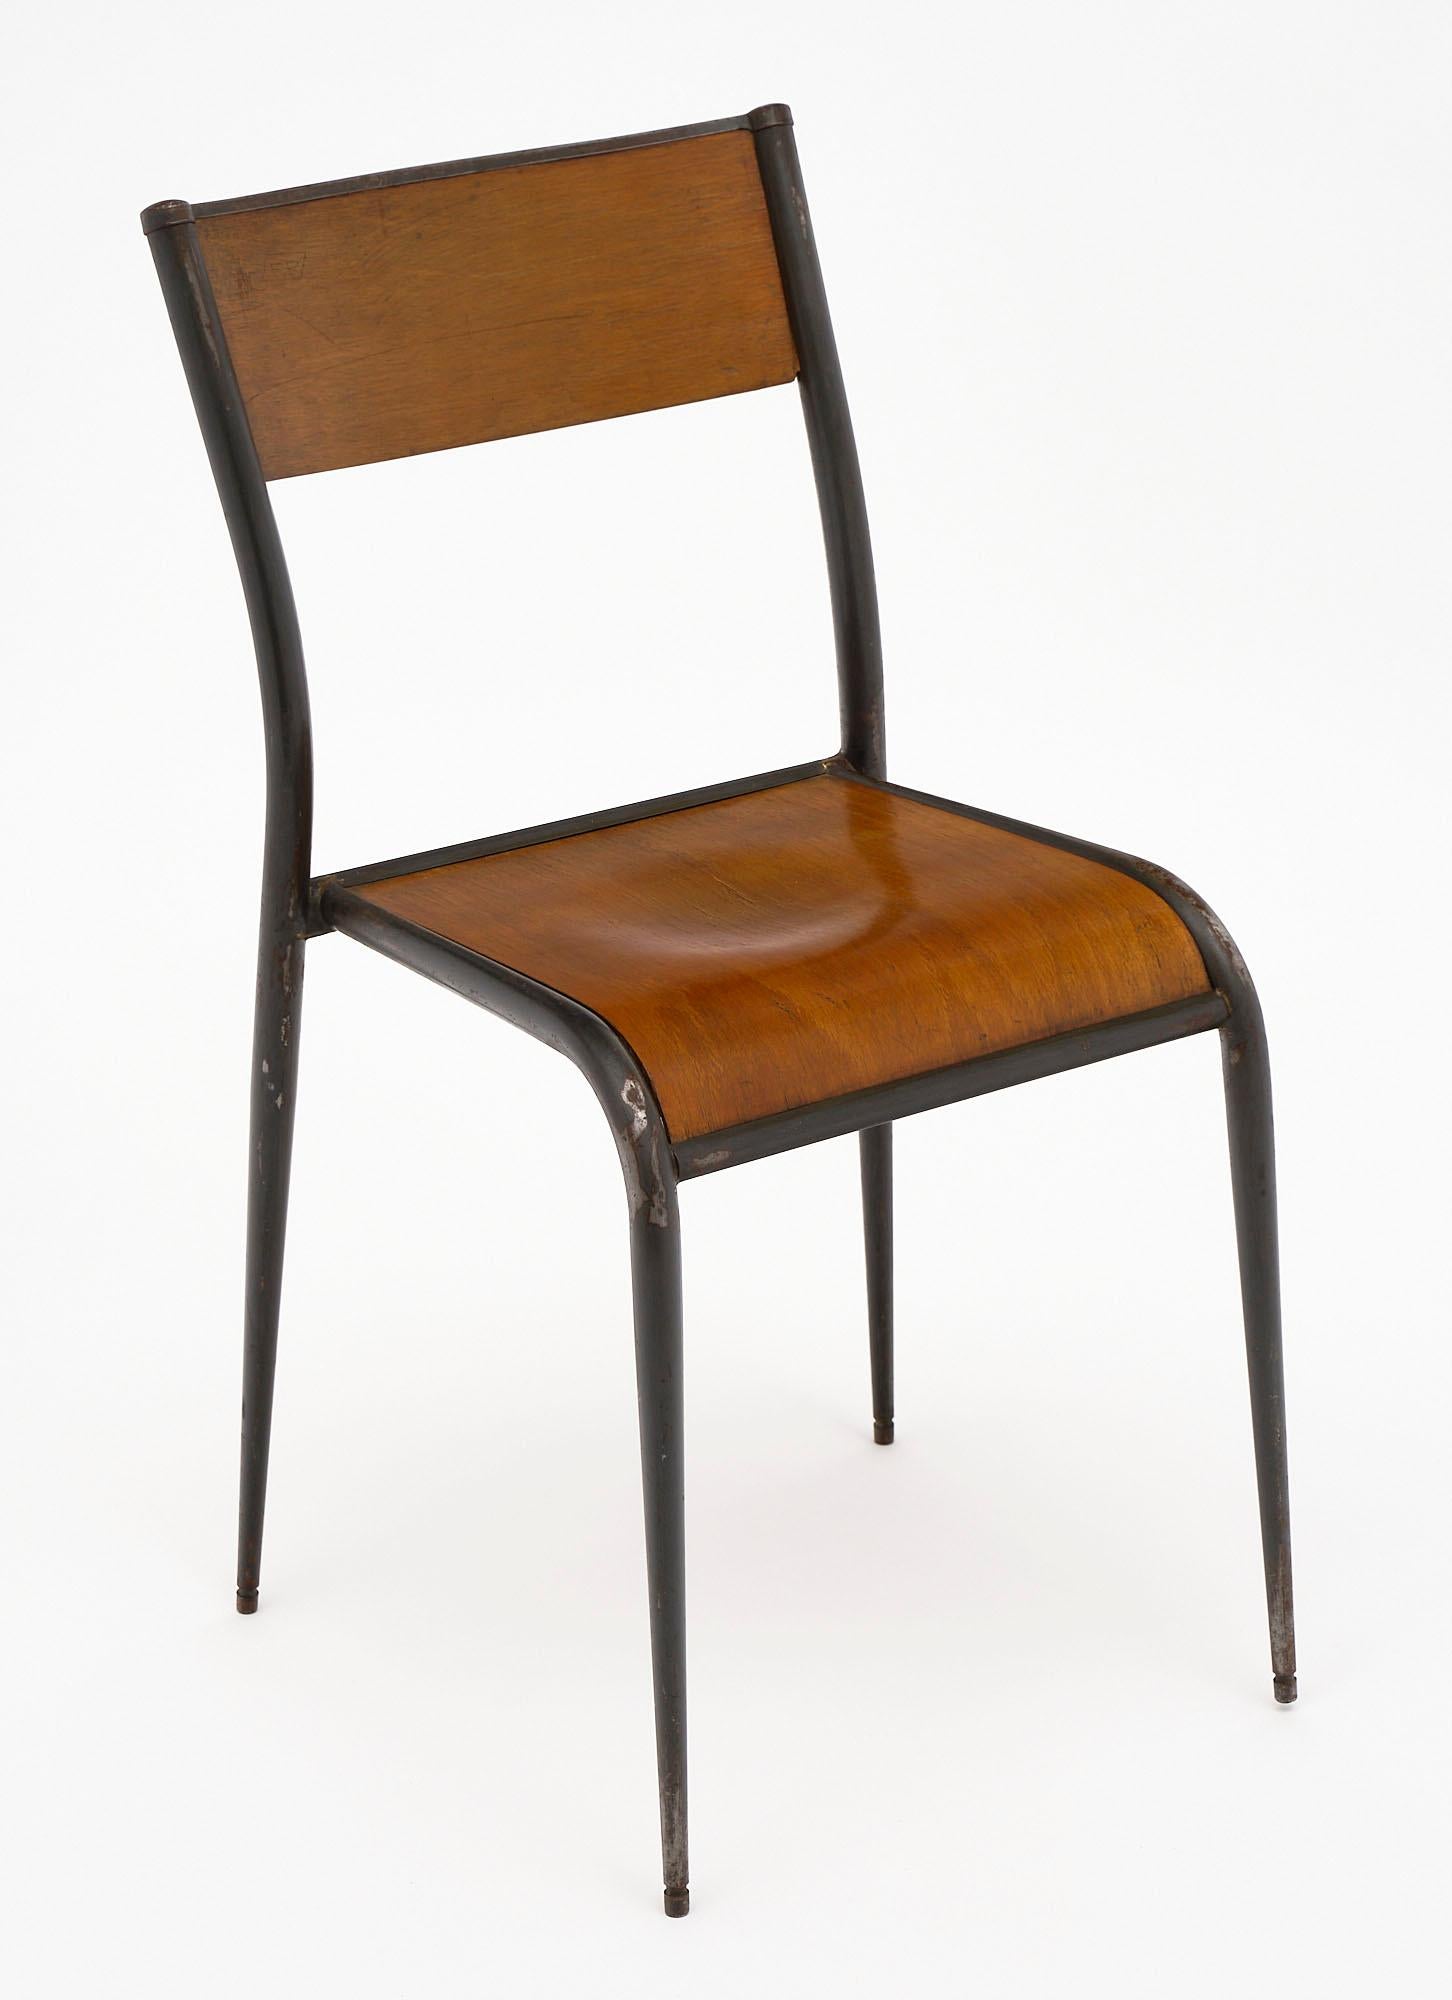 Set of 10 French industrial chairs from a silk manufacturer in the Lyon region. They feature the original painted steel and formed beech wood. The chairs are not identical; there are several different distinctive details for this superb set (shown